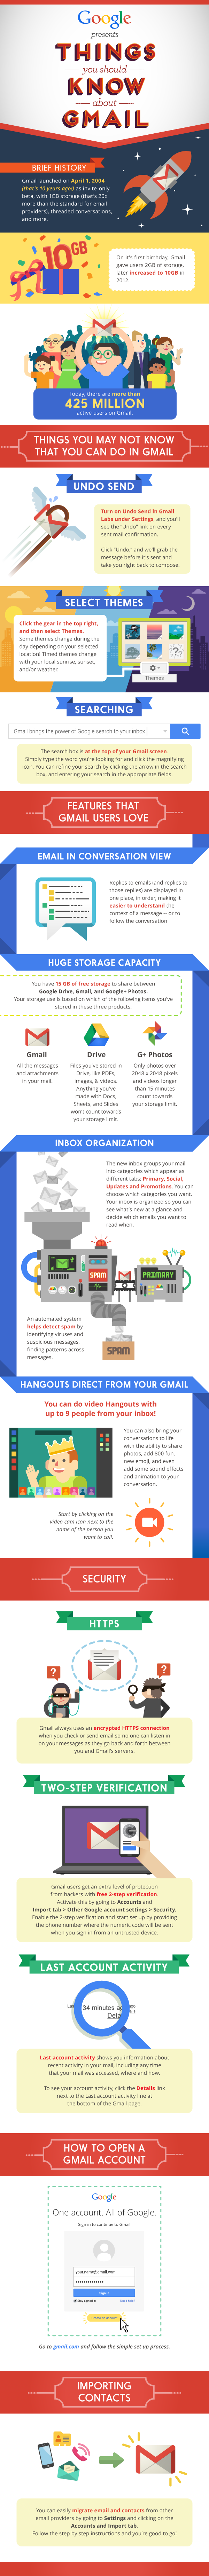 Infographic: Things you should Know about Gmail #infographic